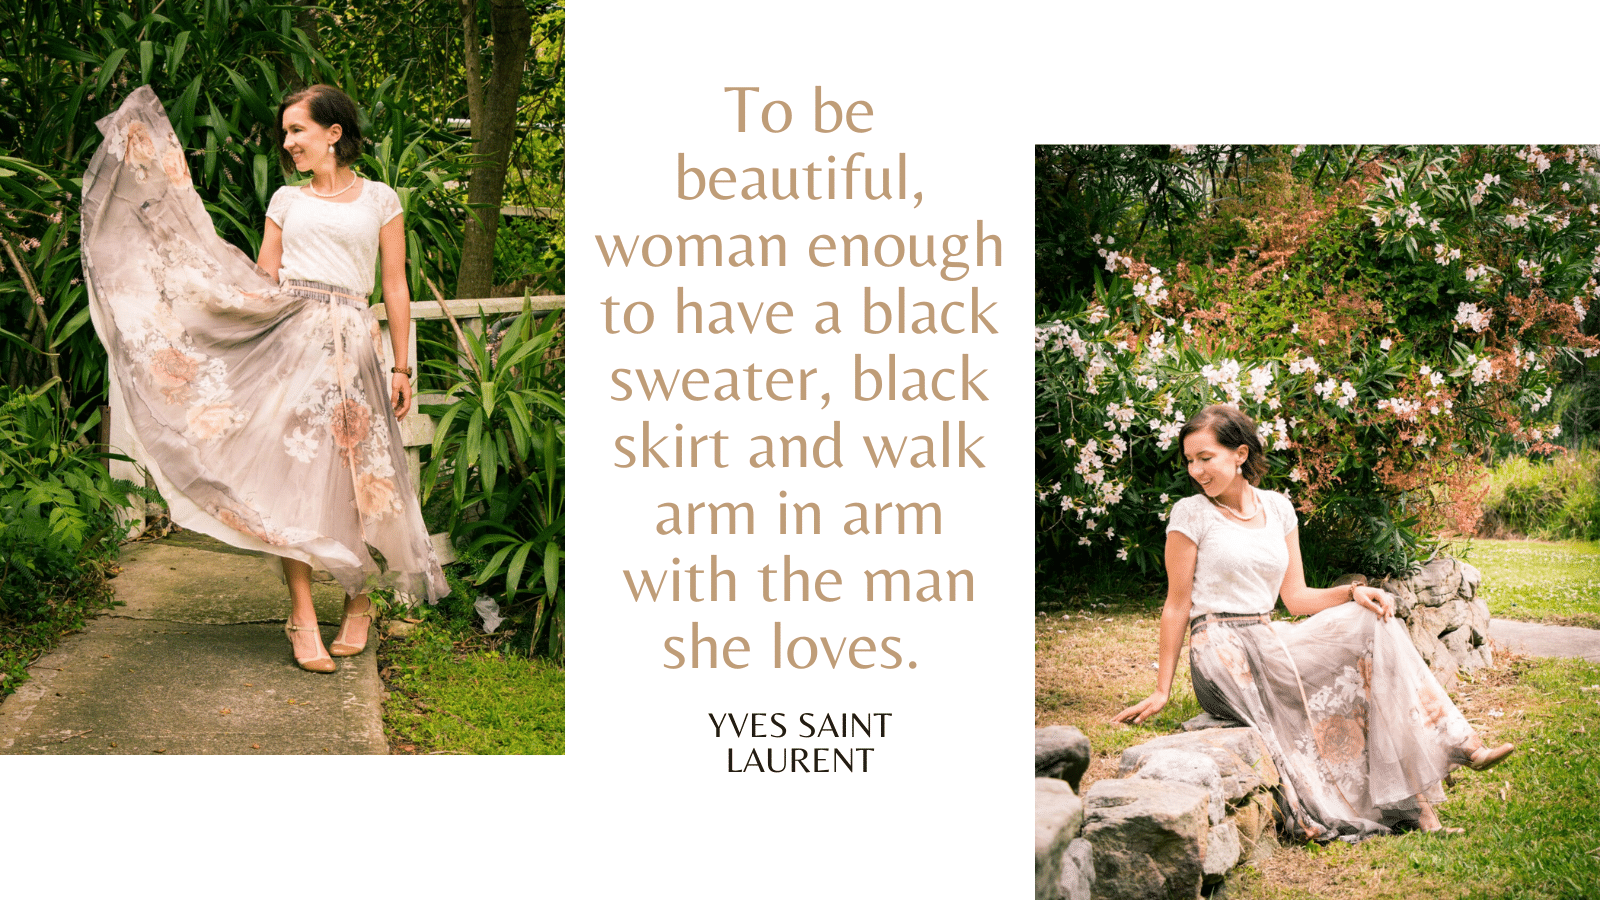 3. To be beautiful, woman enough to have a black sweater, black skirt and walk arm in arm with the man she loves. — Yves Saint Laurent